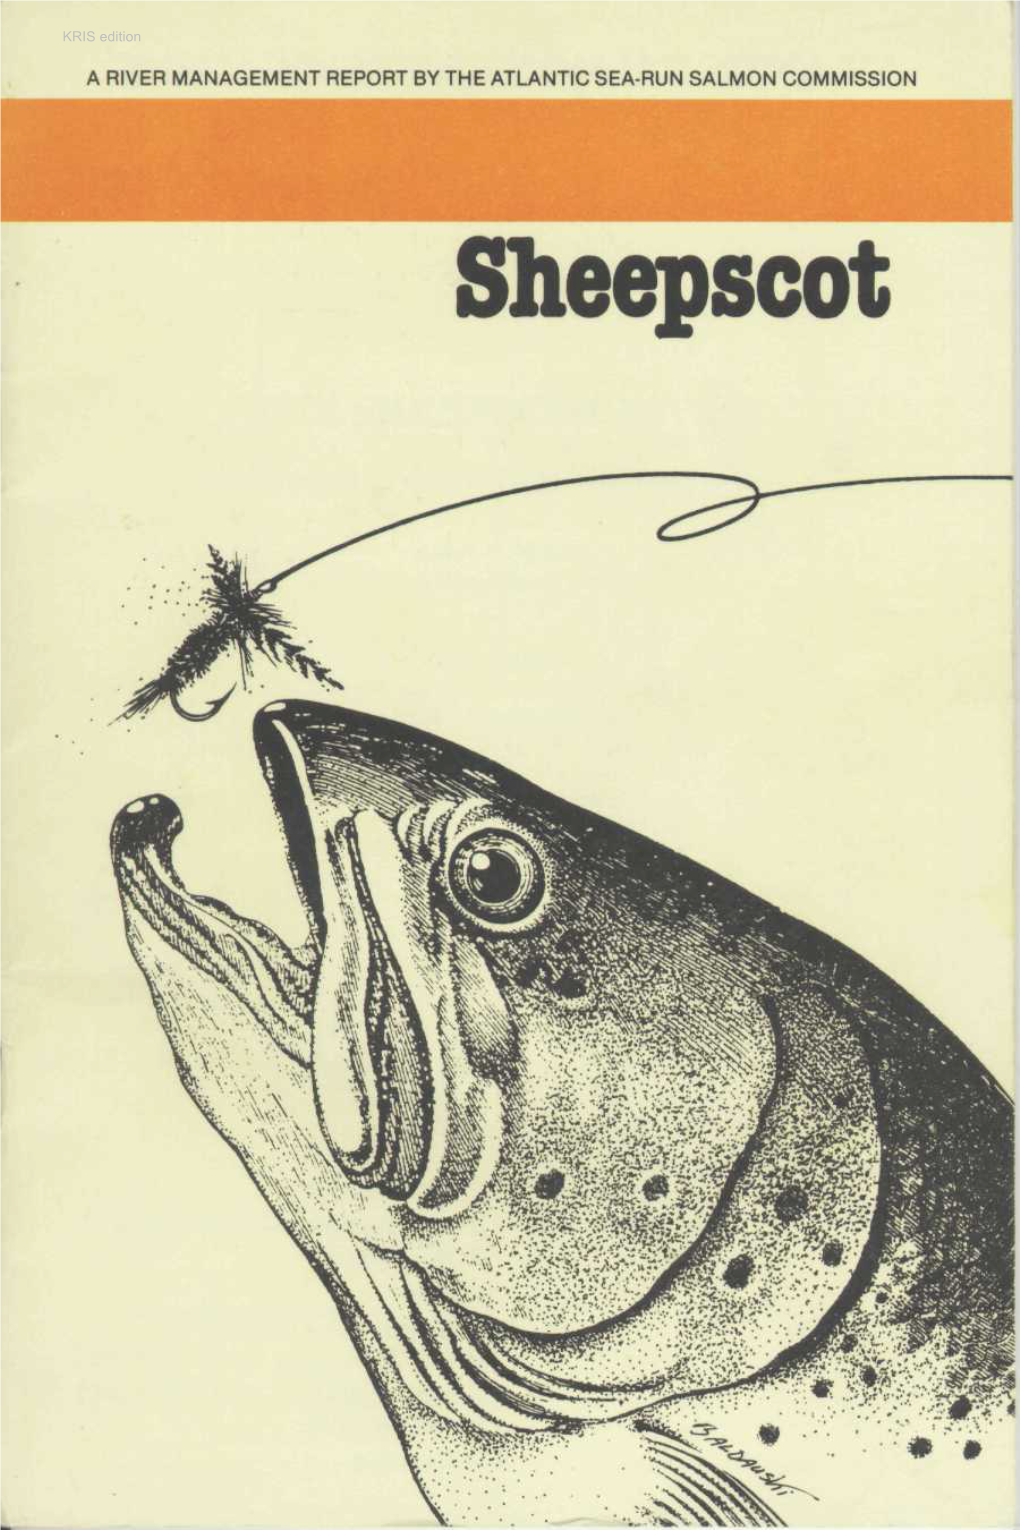 Sheepscot: a River Management Report by the Atlantic Sea-Run Salmon Commission